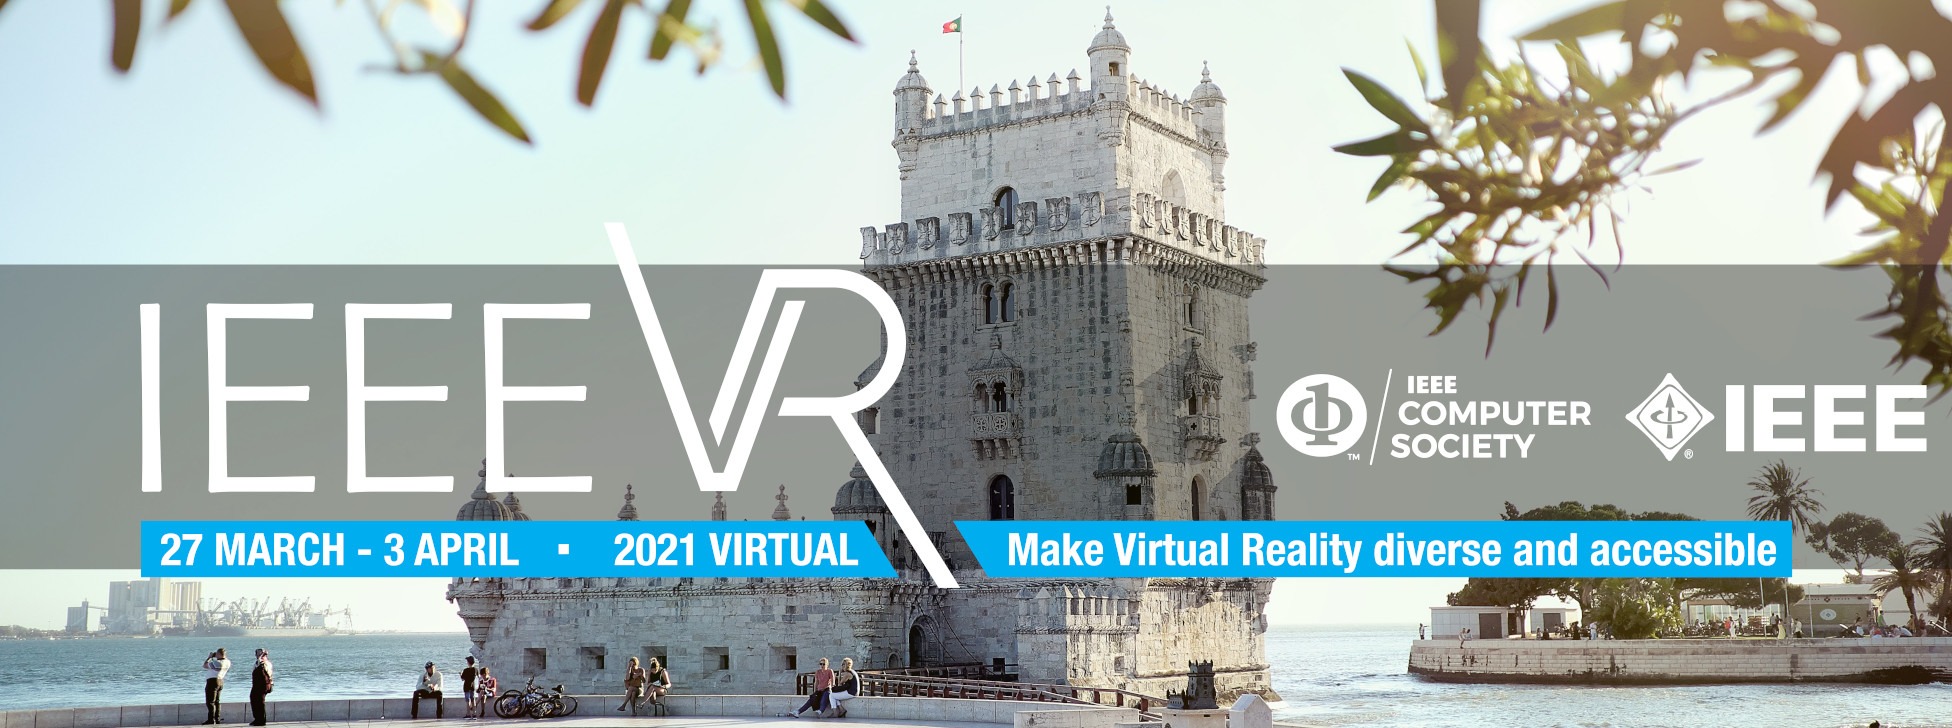 IEEE Conference on Virtual Reality and 3D User Interfaces (IEEE VR